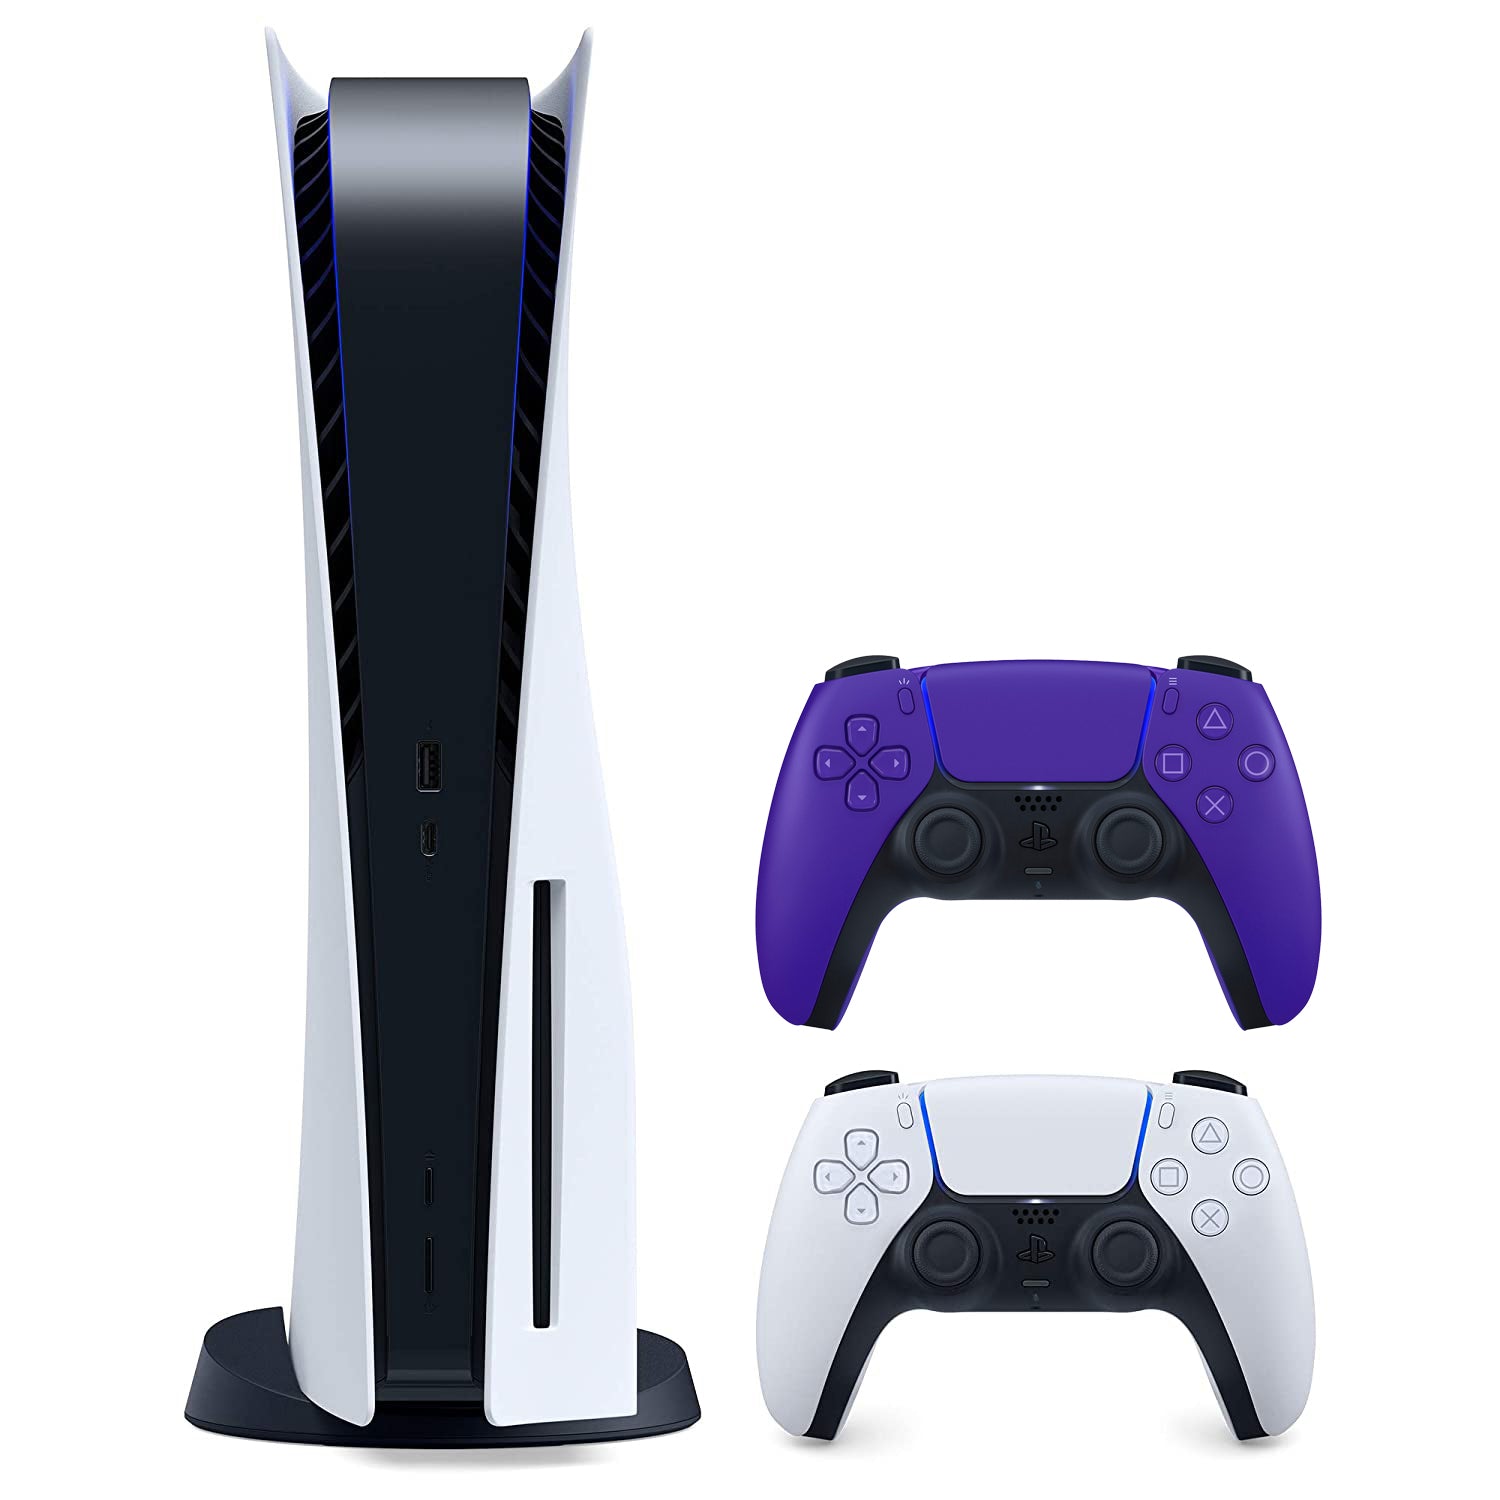 Sony Playstation 5 Disc Version (Sony PS5 Disc) with Extra DualSense Controller - Galactic Purple Bundle - Pro-Distributing